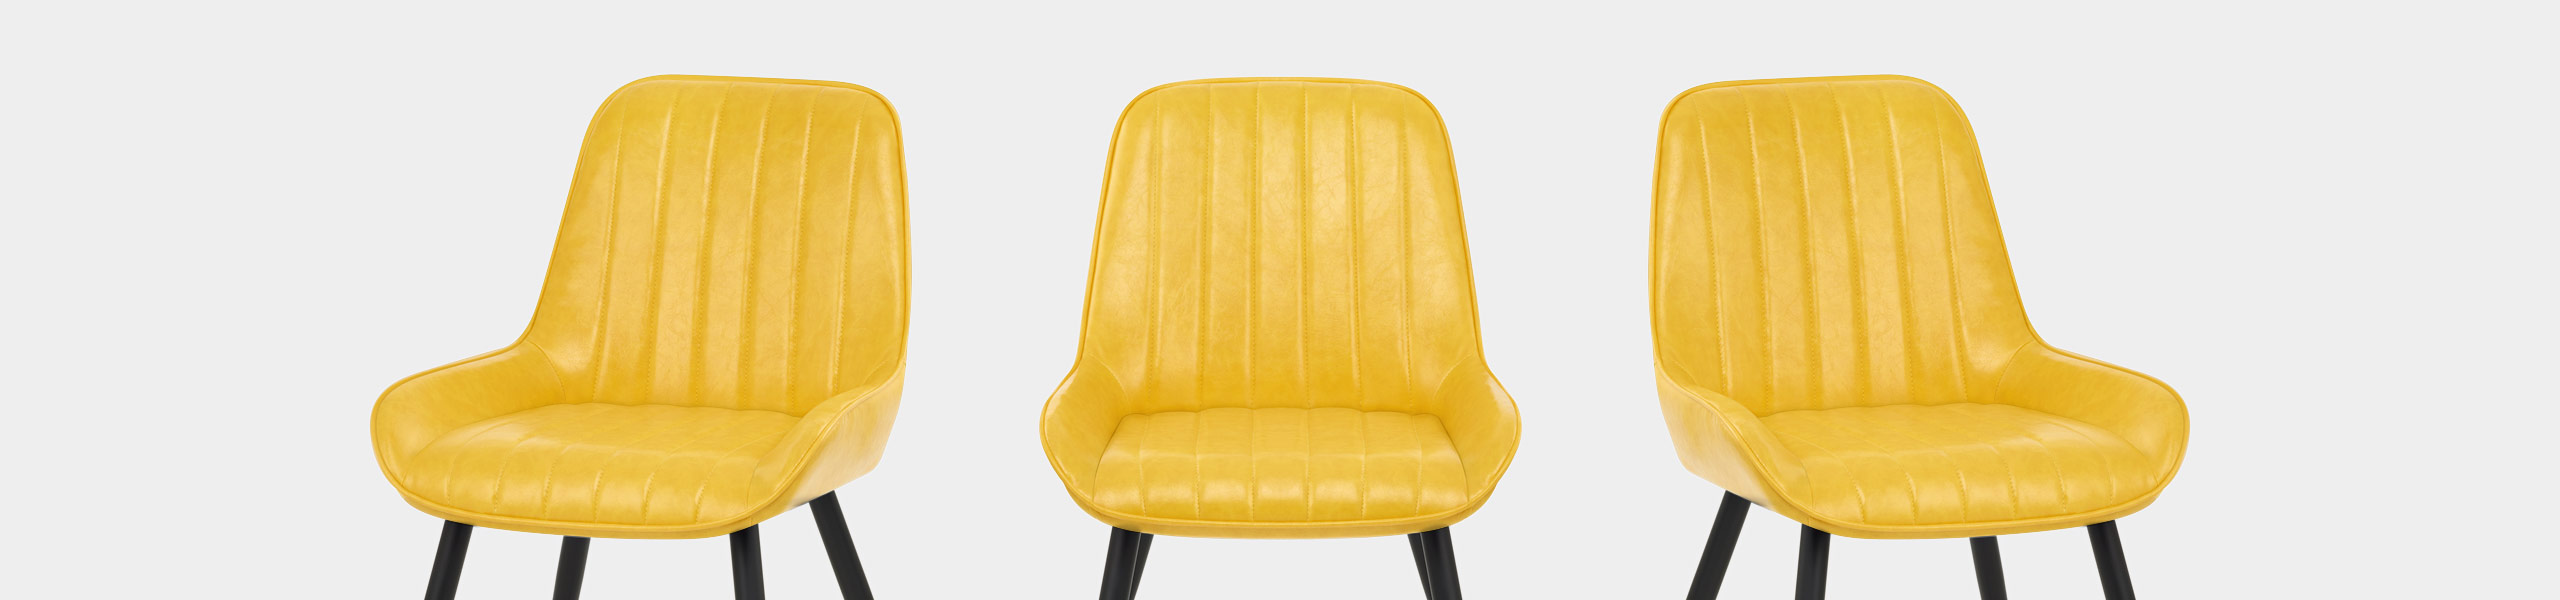 Mustang Chair Antique Yellow Video Banner